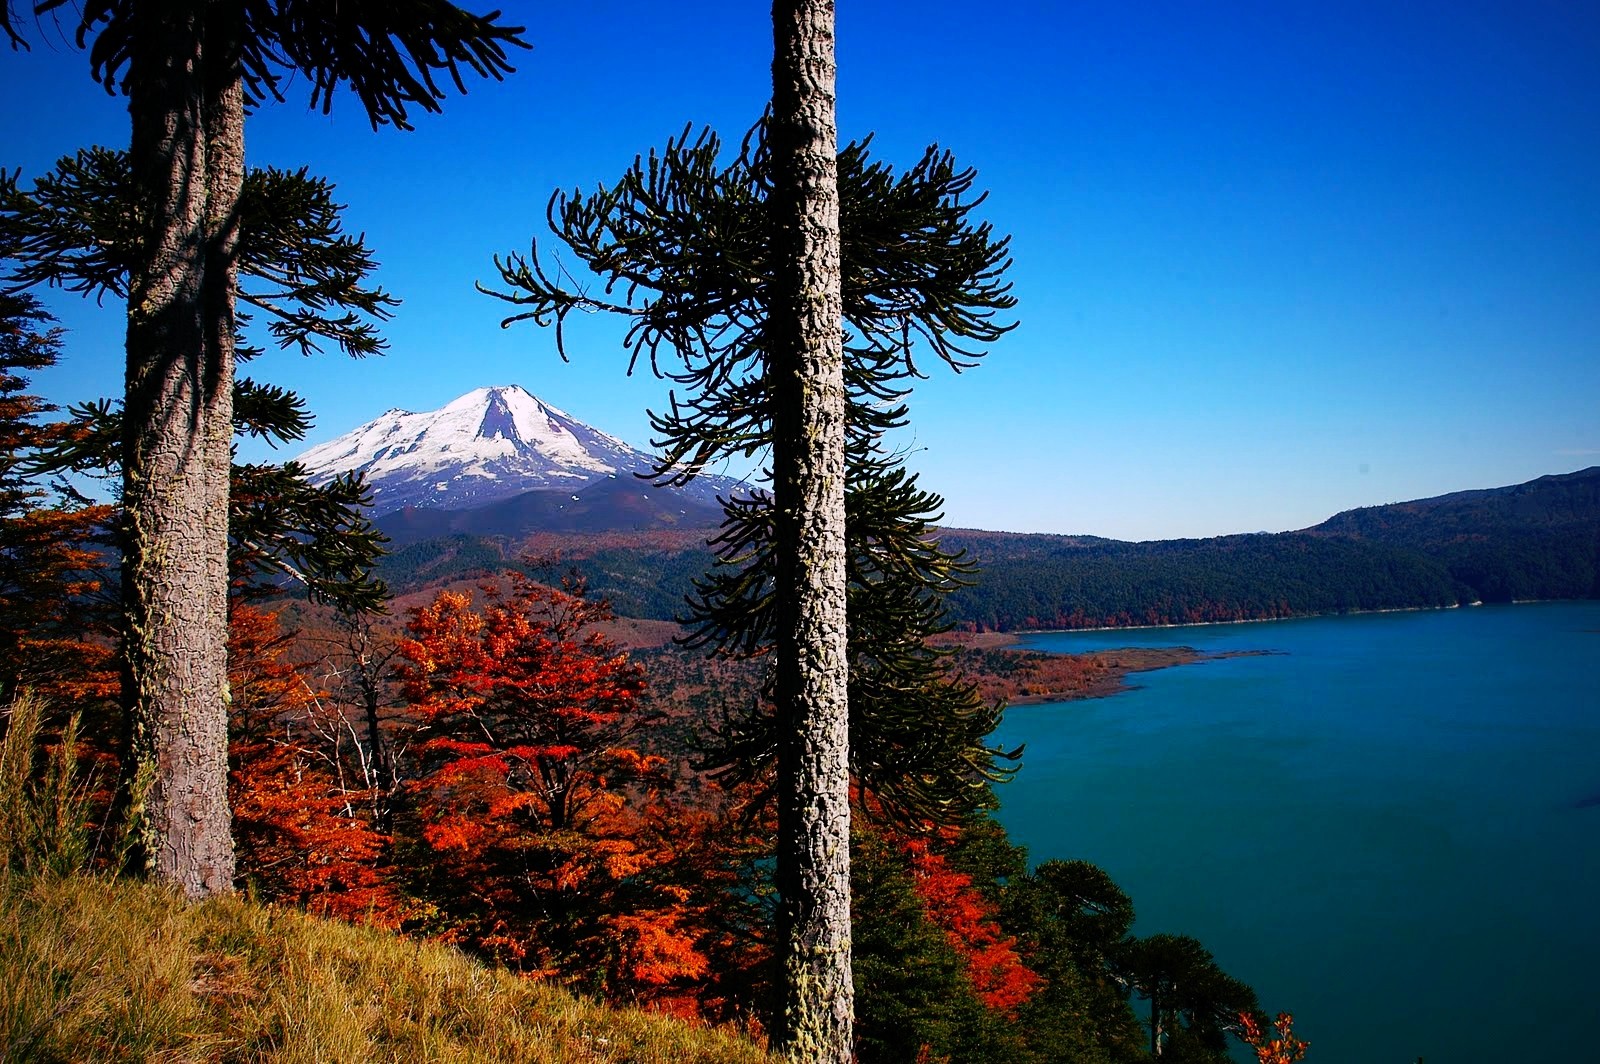 General 1600x1064 volcano Chile forest lake fall snowy peak trees monkey puzzle tree grass morning nature mountains landscape South America